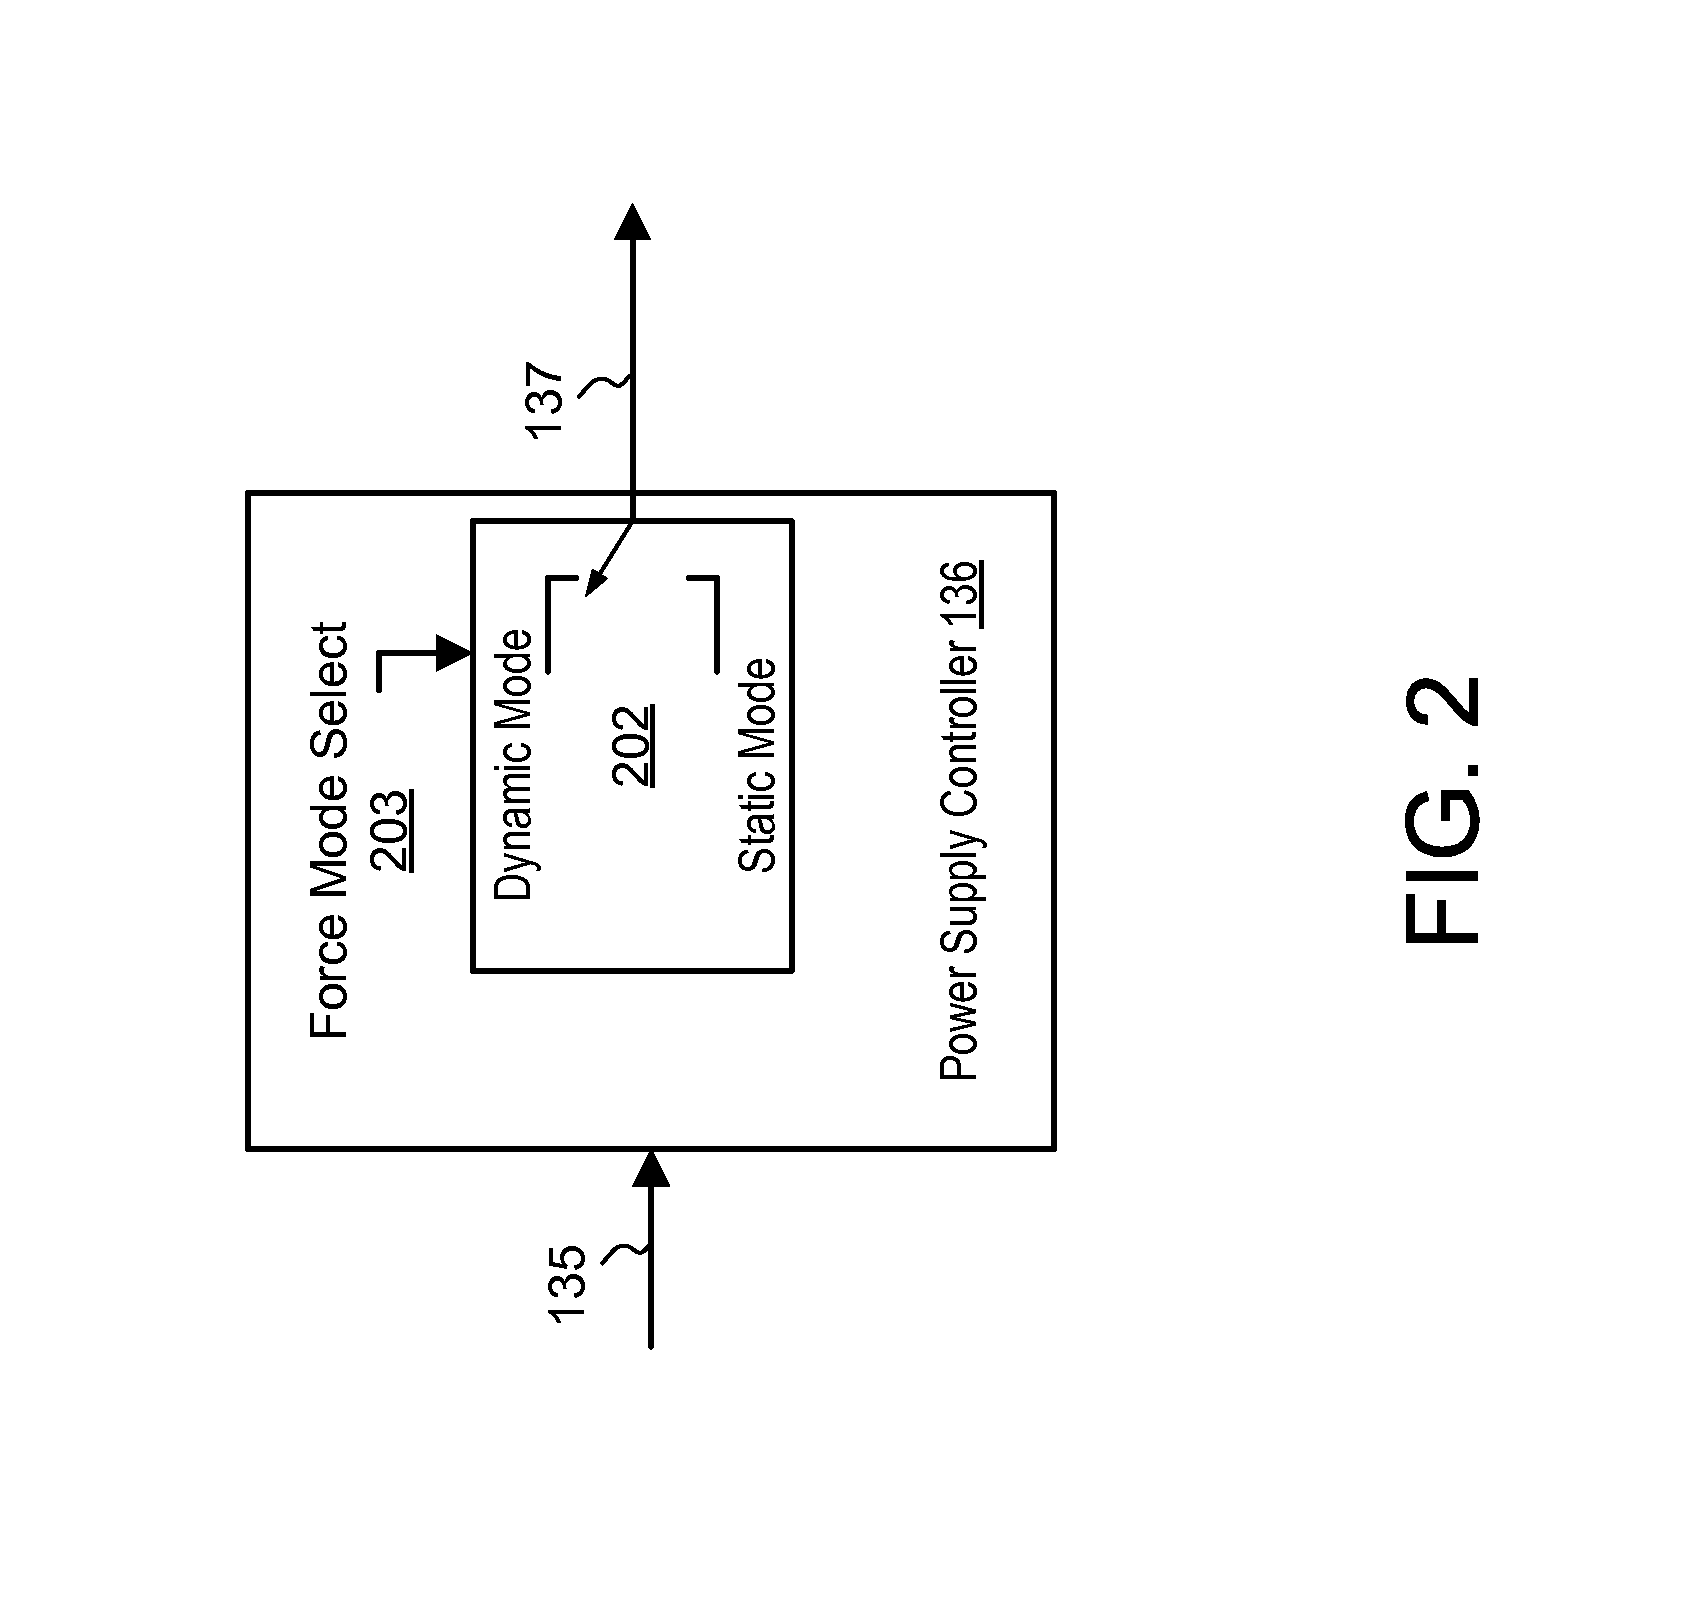 Envelope Tracking Power Amplifier System with Delay Calibration